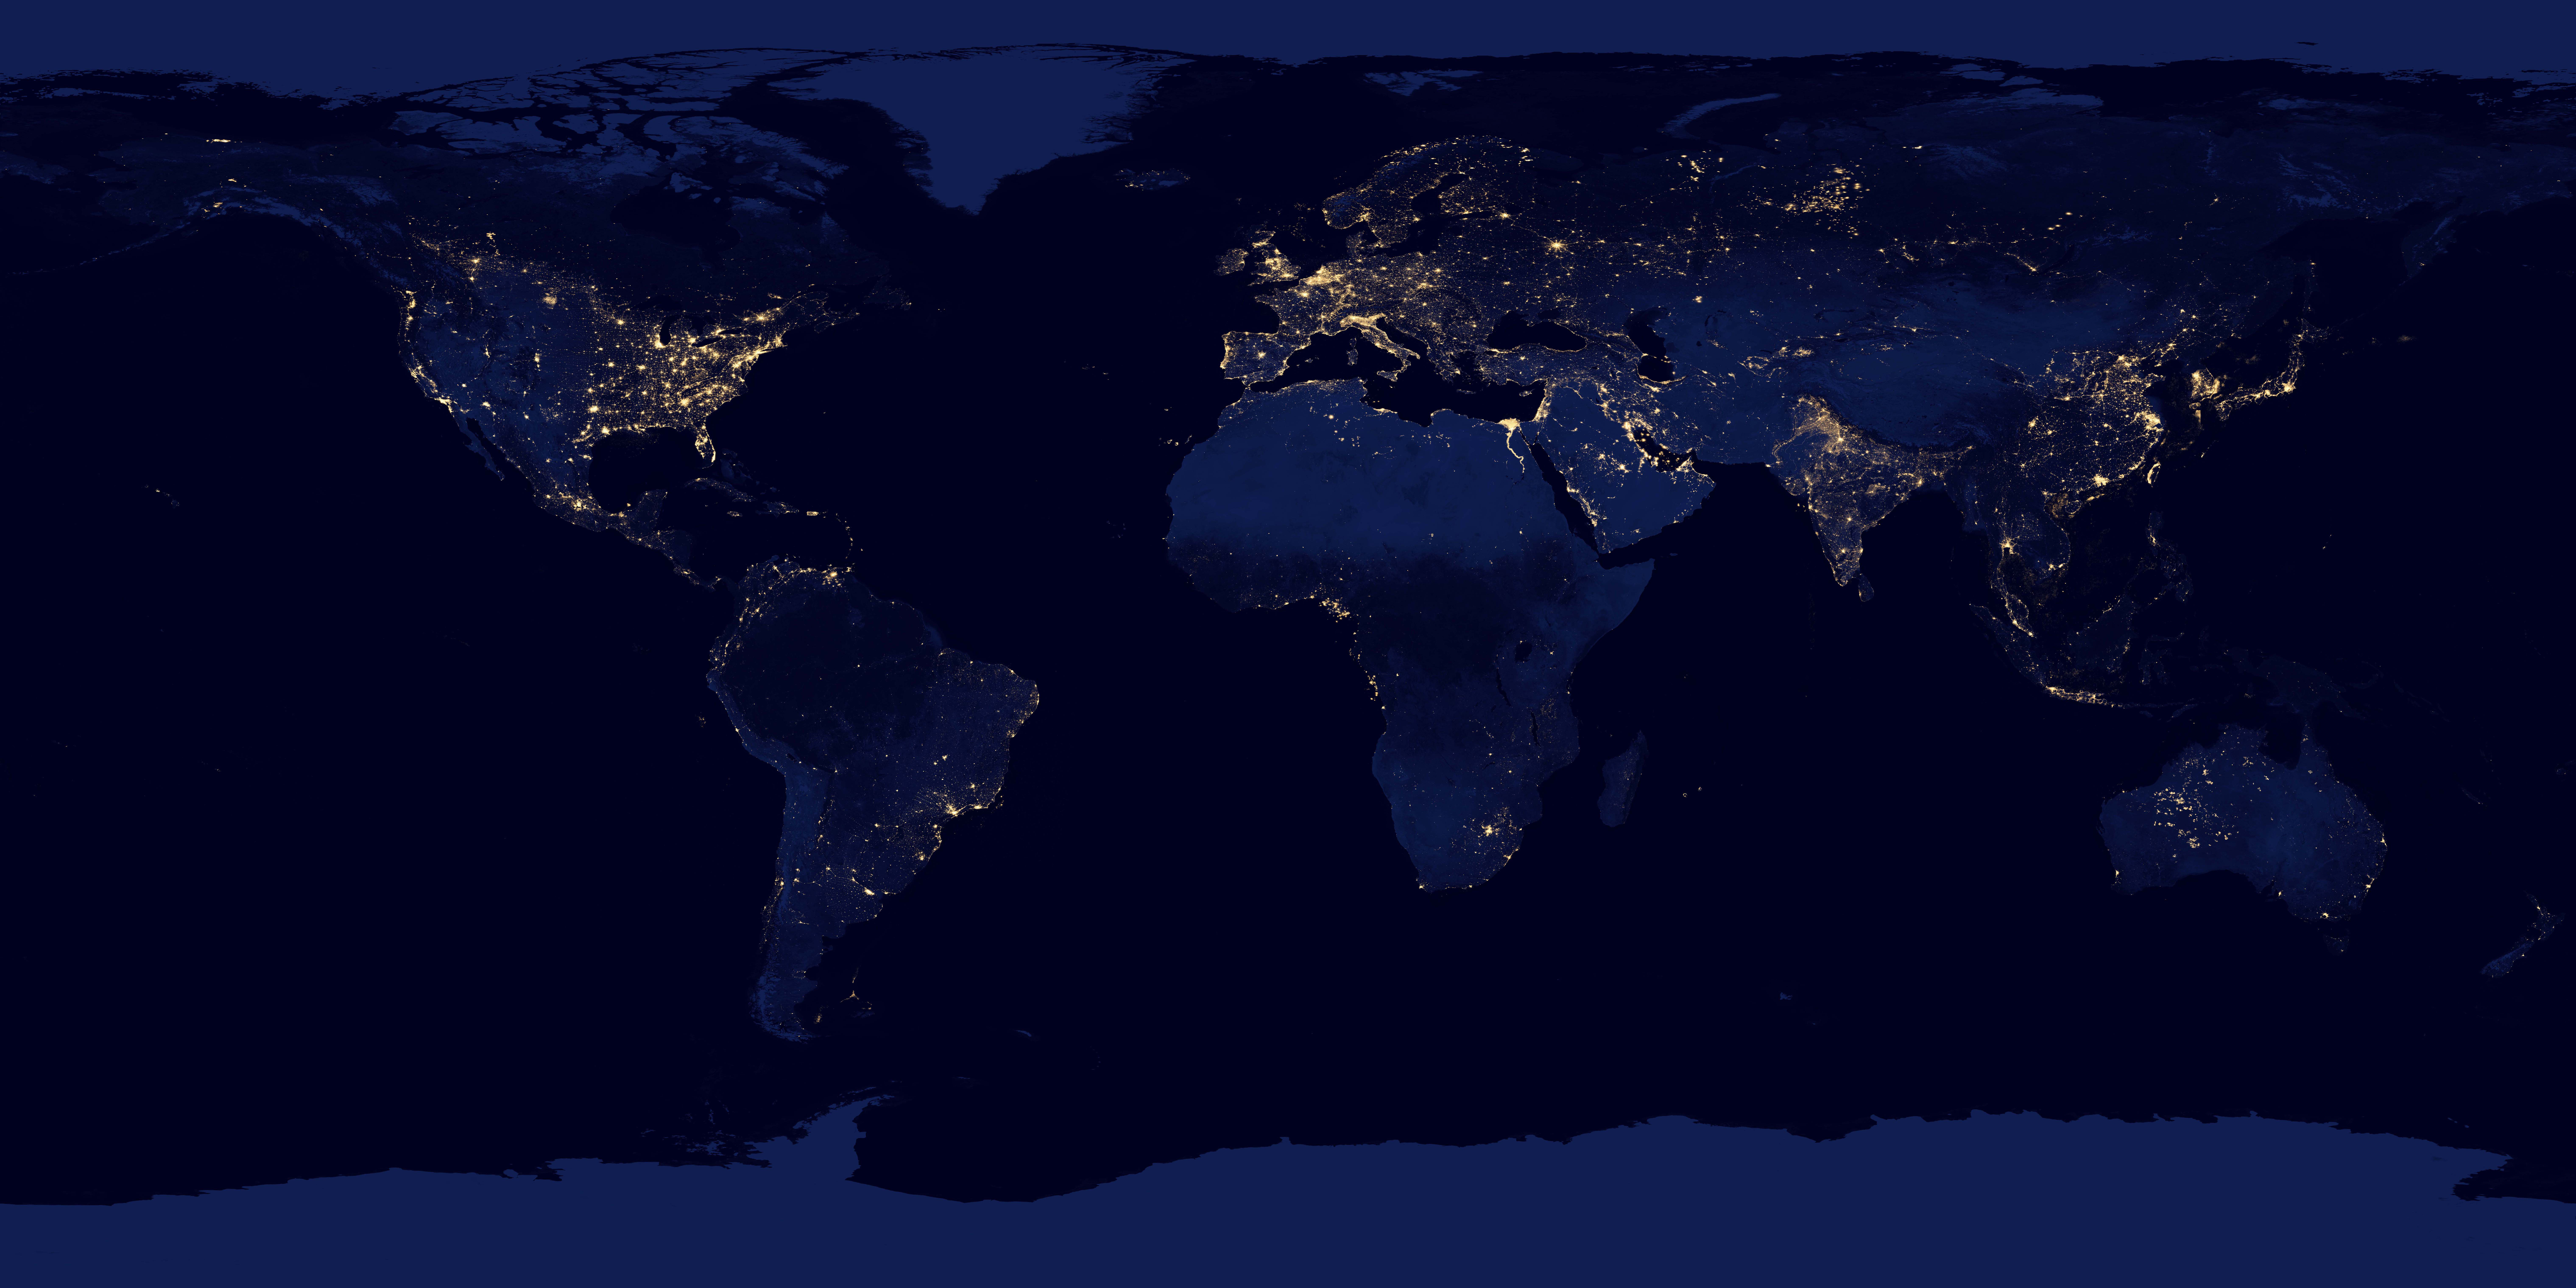 Earth Continents Satellite Photo Night City Lights 12150x6075